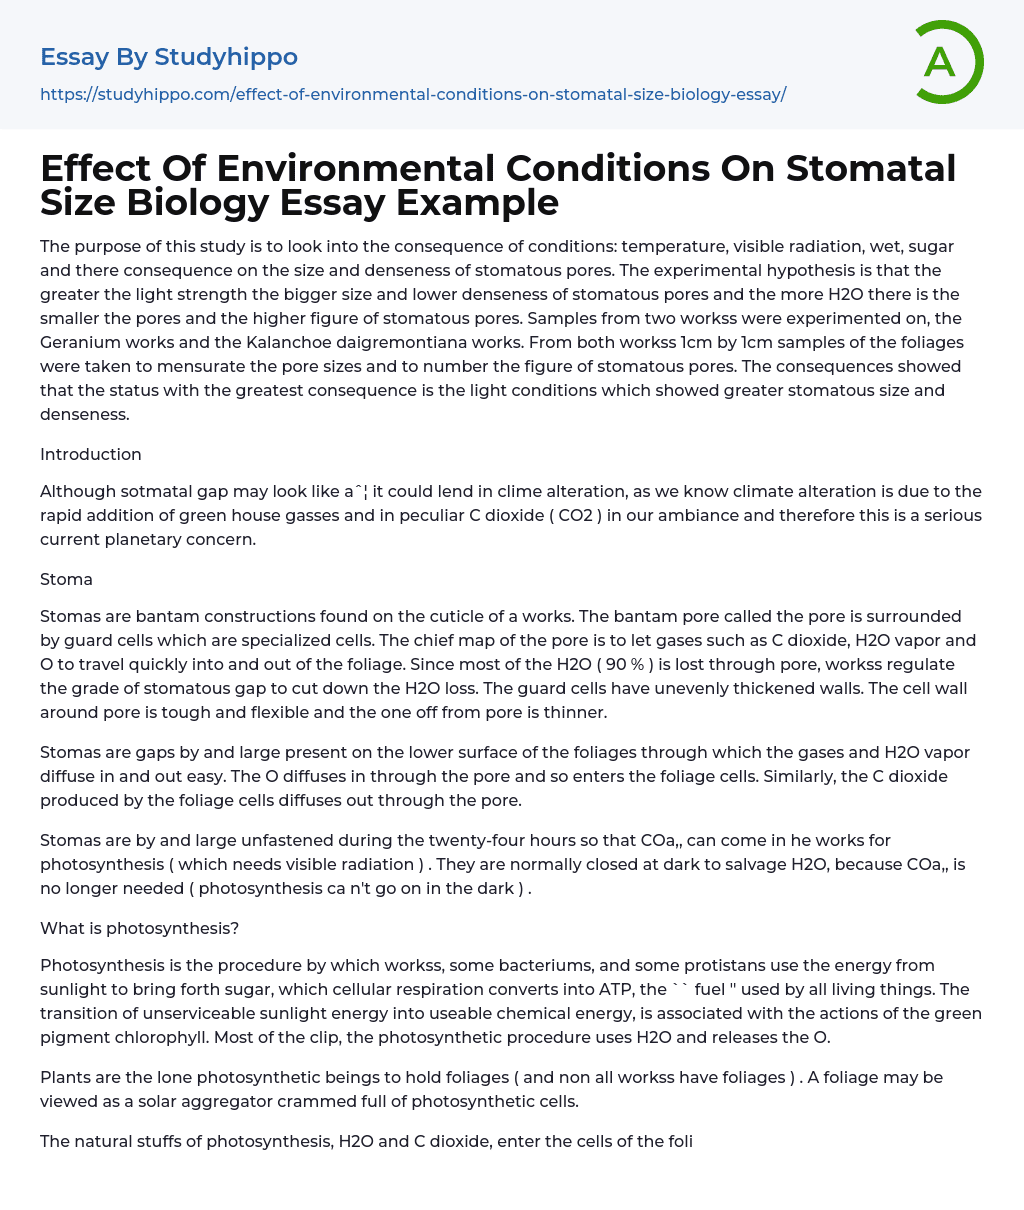 Effect Of Environmental Conditions On Stomatal Size Biology Essay Example